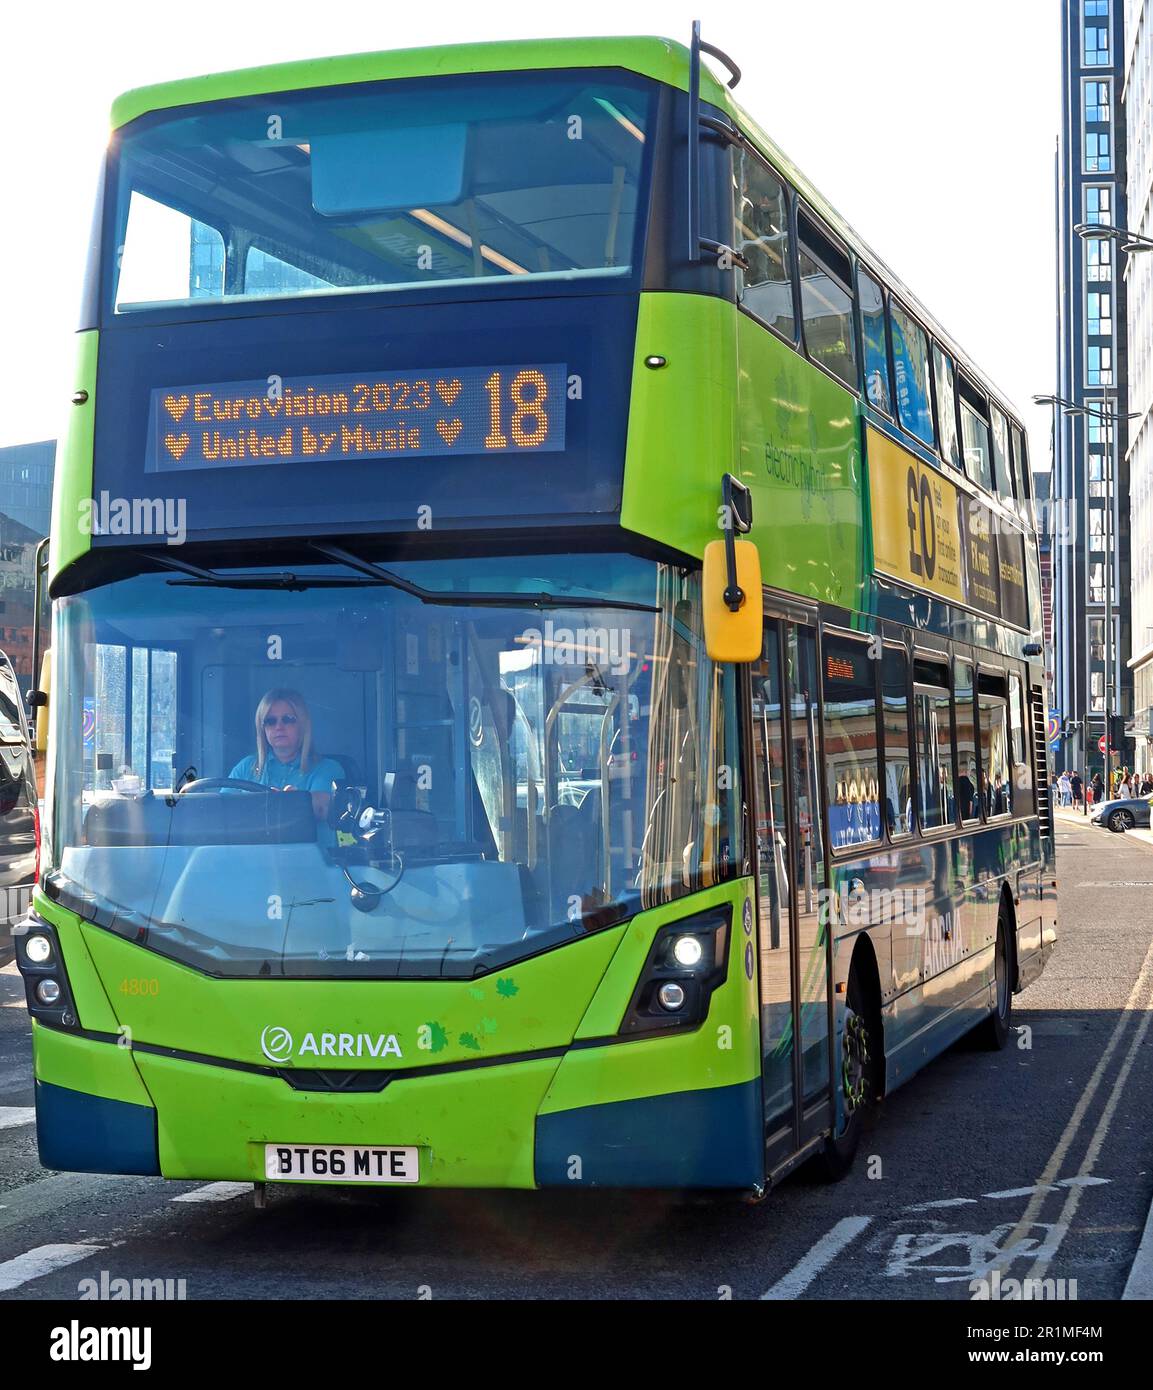 Cleaner, Electric Hybrid, Volvo Arriva bus 18, outside Liverpool One bus station, Paradise Street, Liverpool, Merseyside, England, UK, L1 3EU Stock Photo